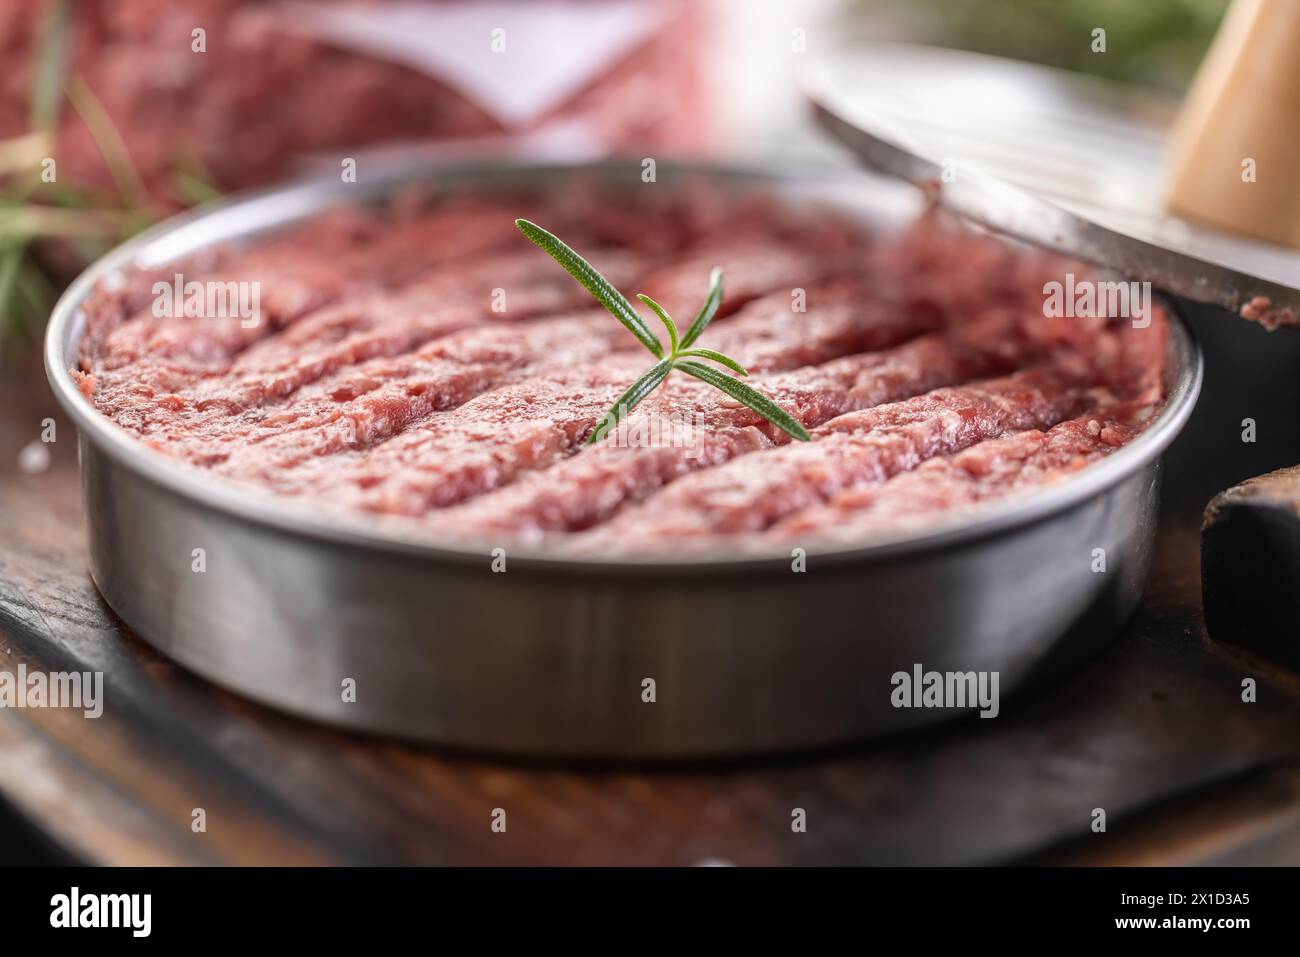 Fresh raw ground beef patties with rosemary salt and pepper made in a meat form on a cutting board. Stock Photo